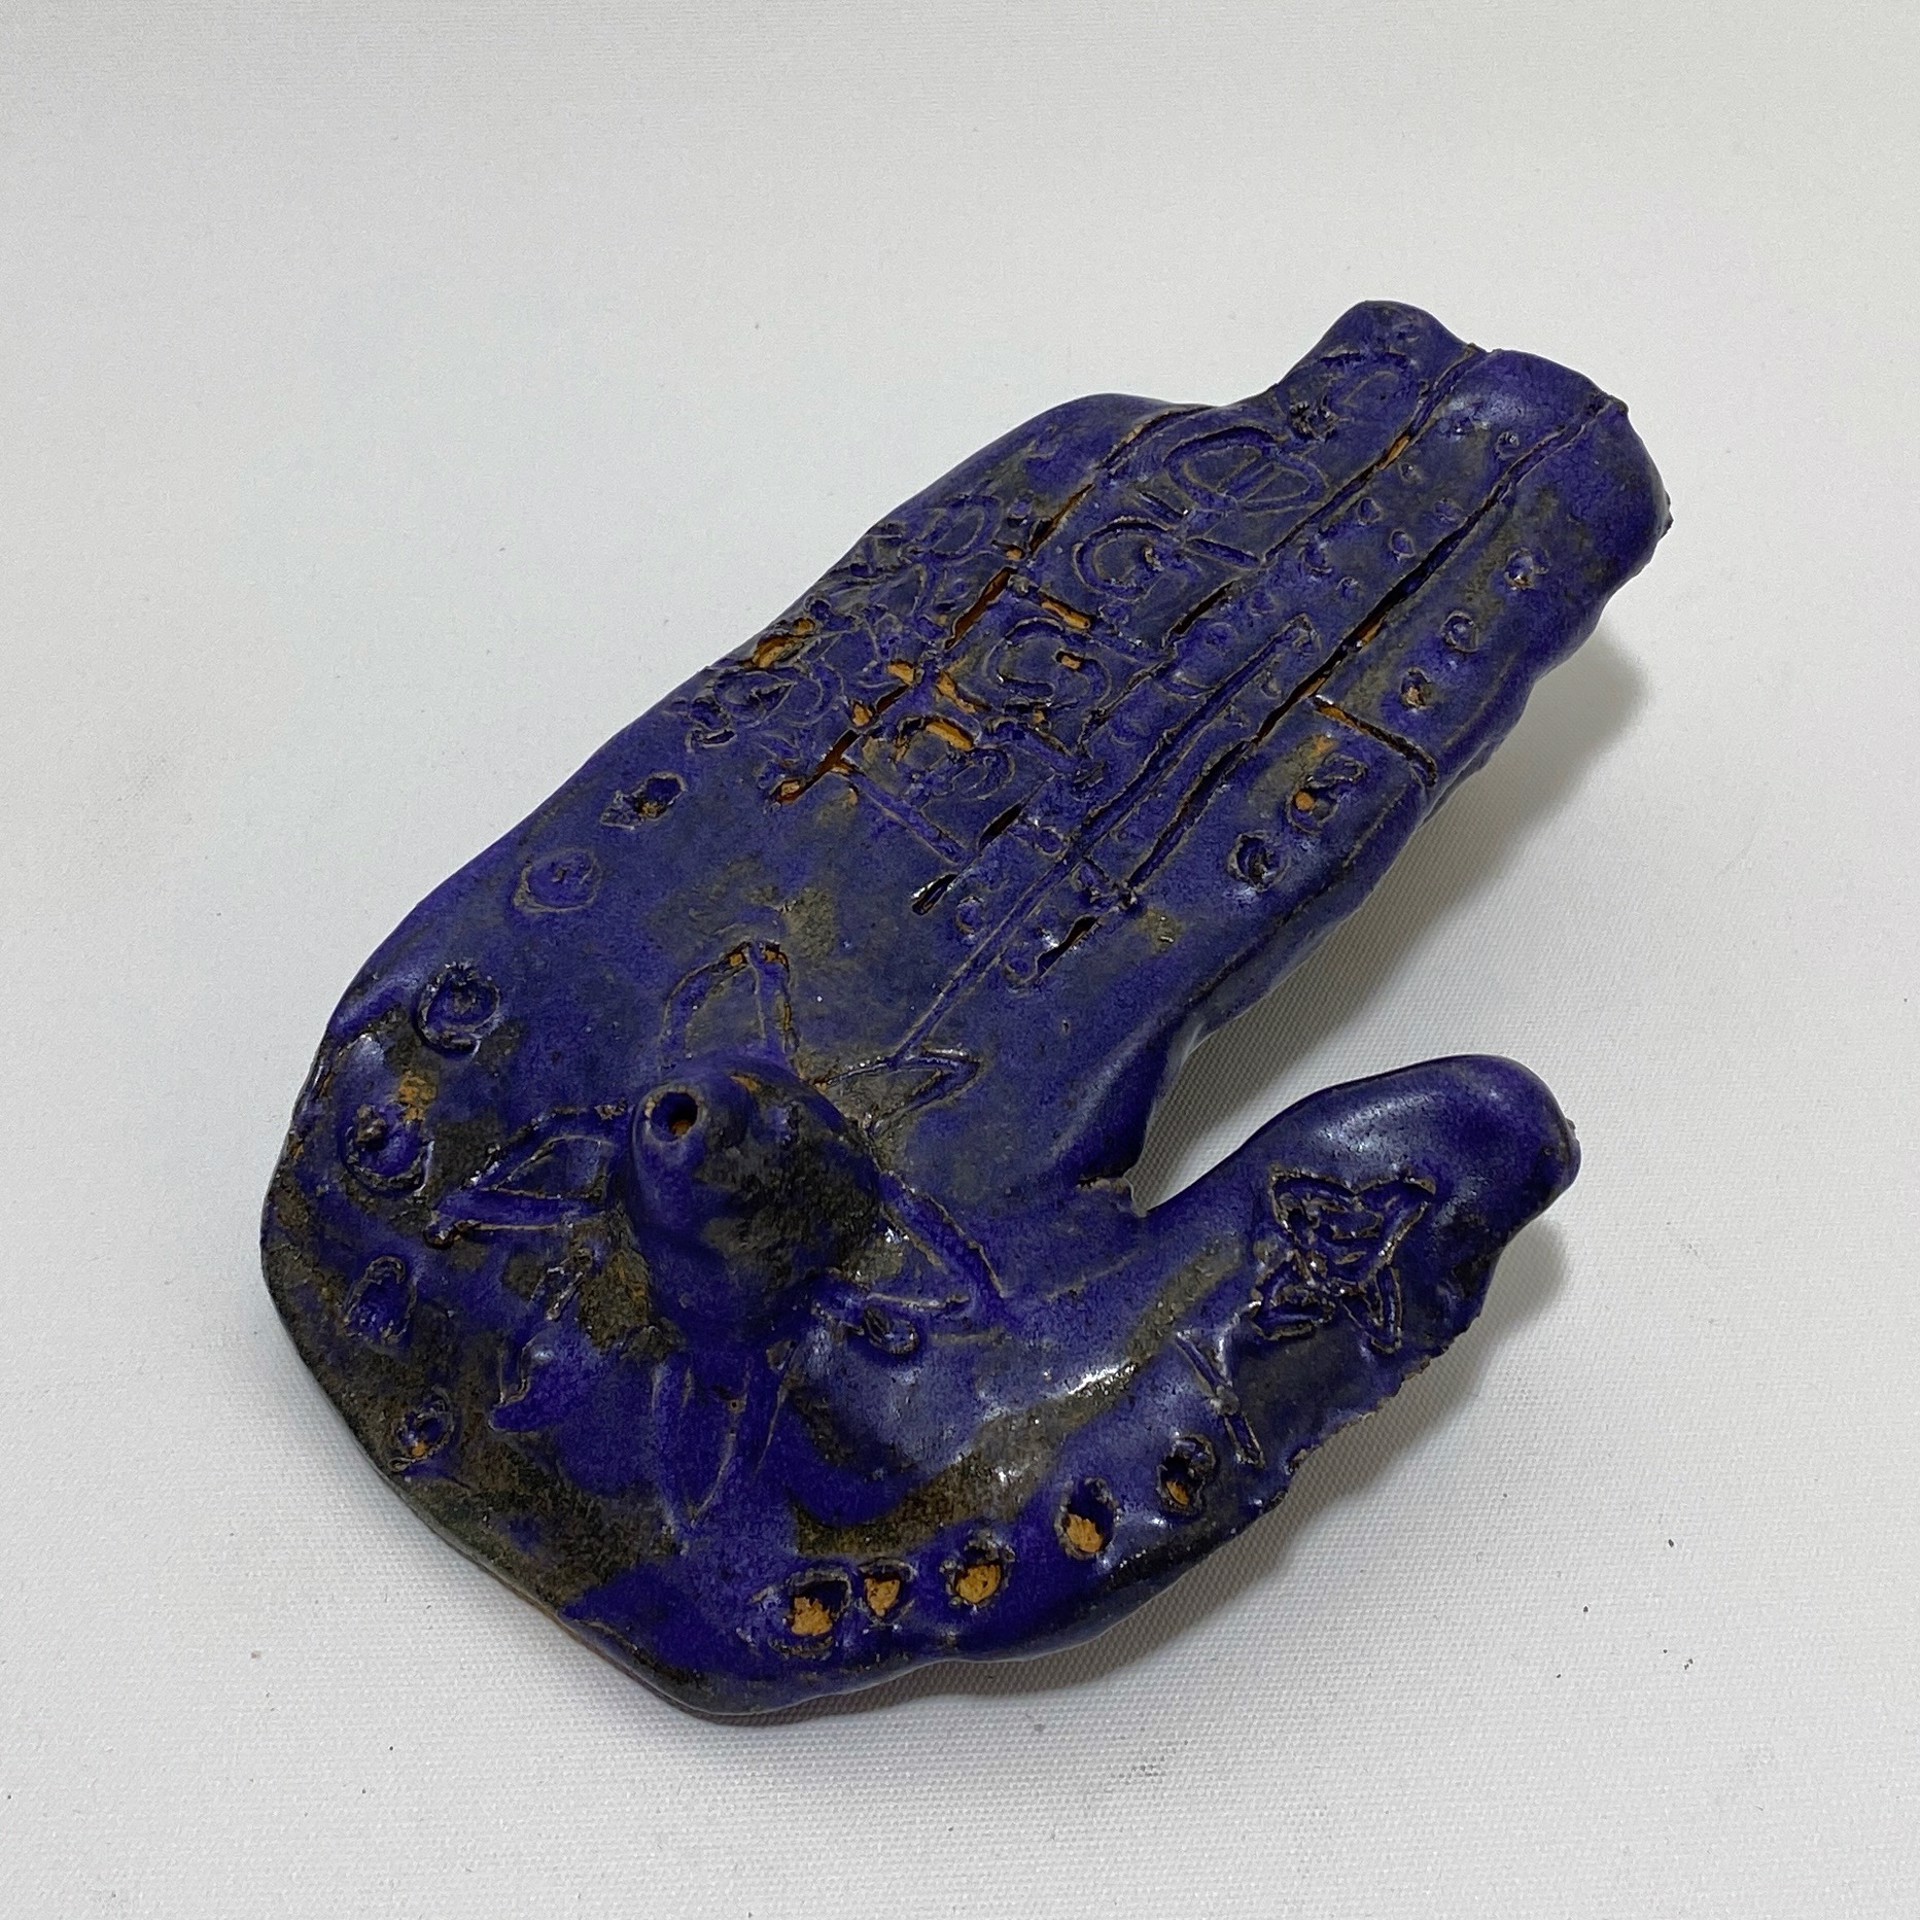 "Purple Hand Incense Holder" by Stephanie by One Step Beyond